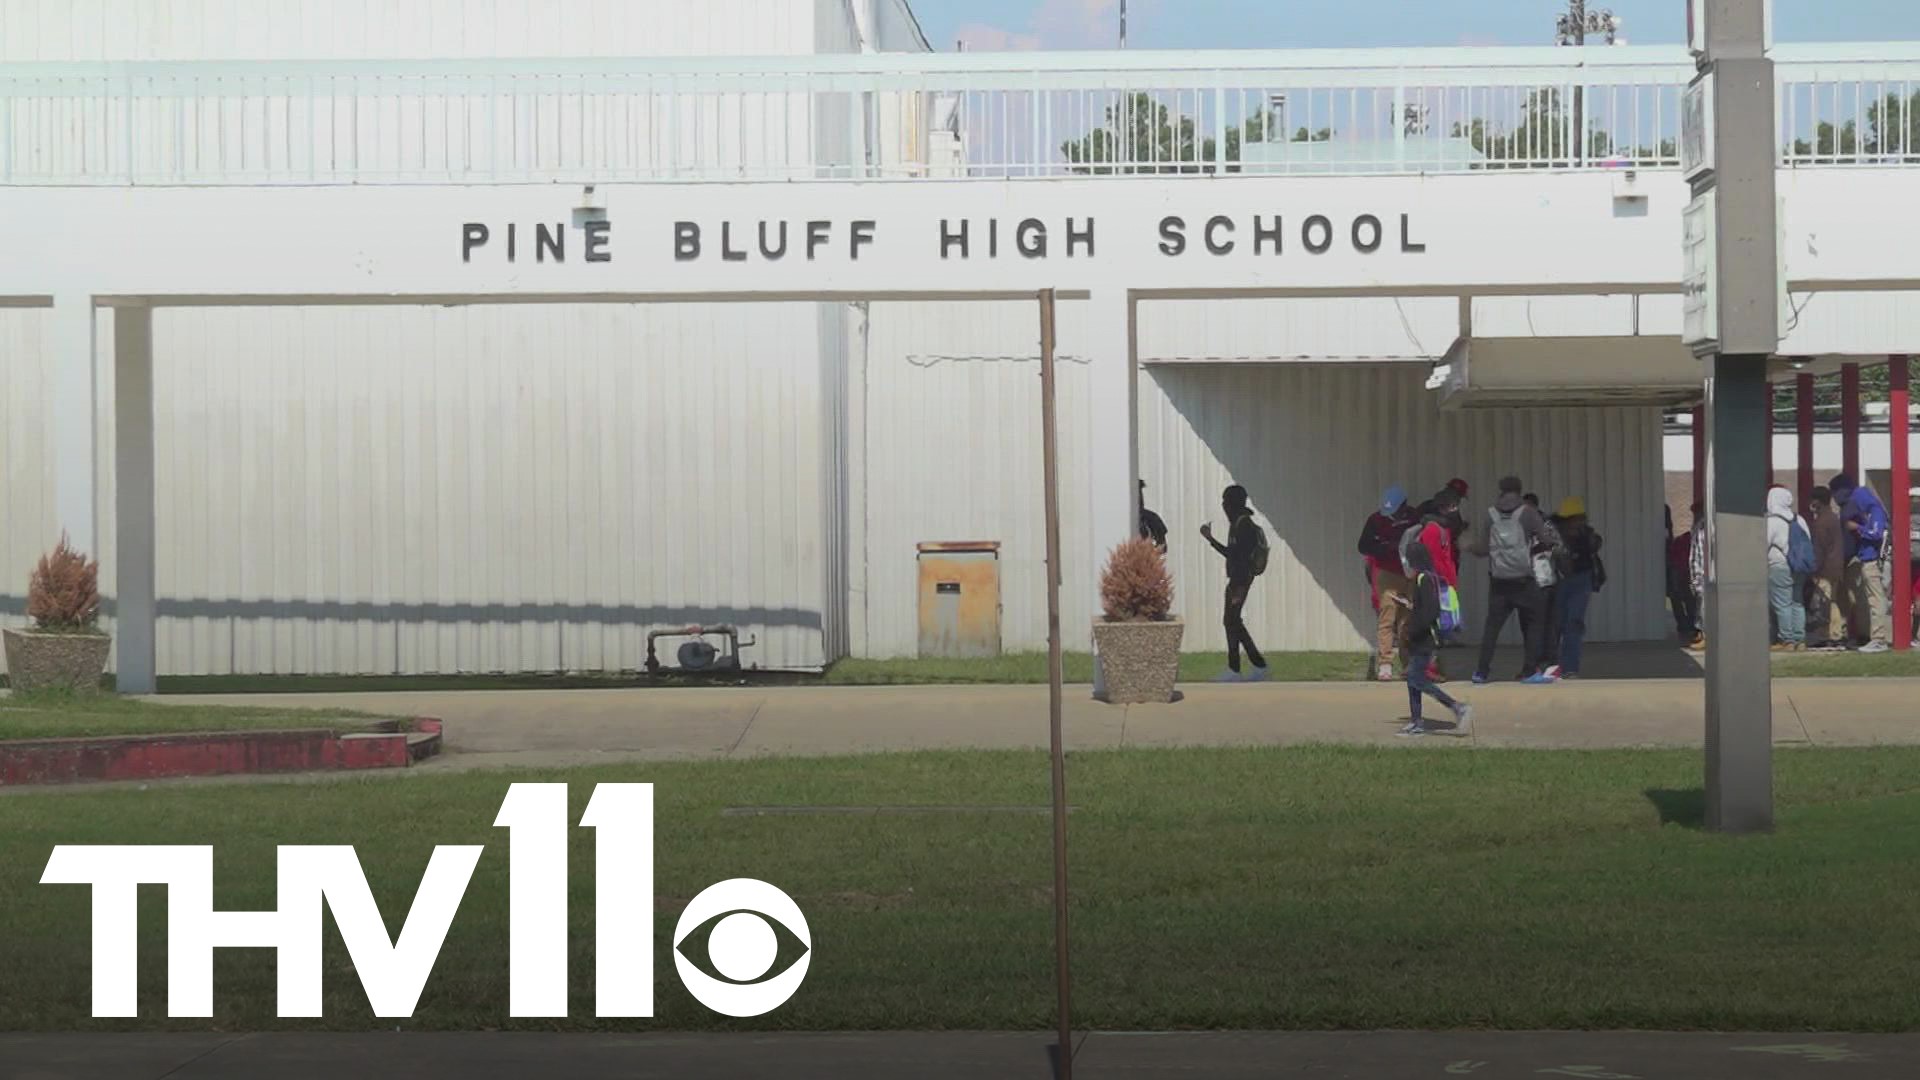 A school fight in September forced Pine Bluff High School to close for one day, so staff and administration could regroup and determine a plan for safety.